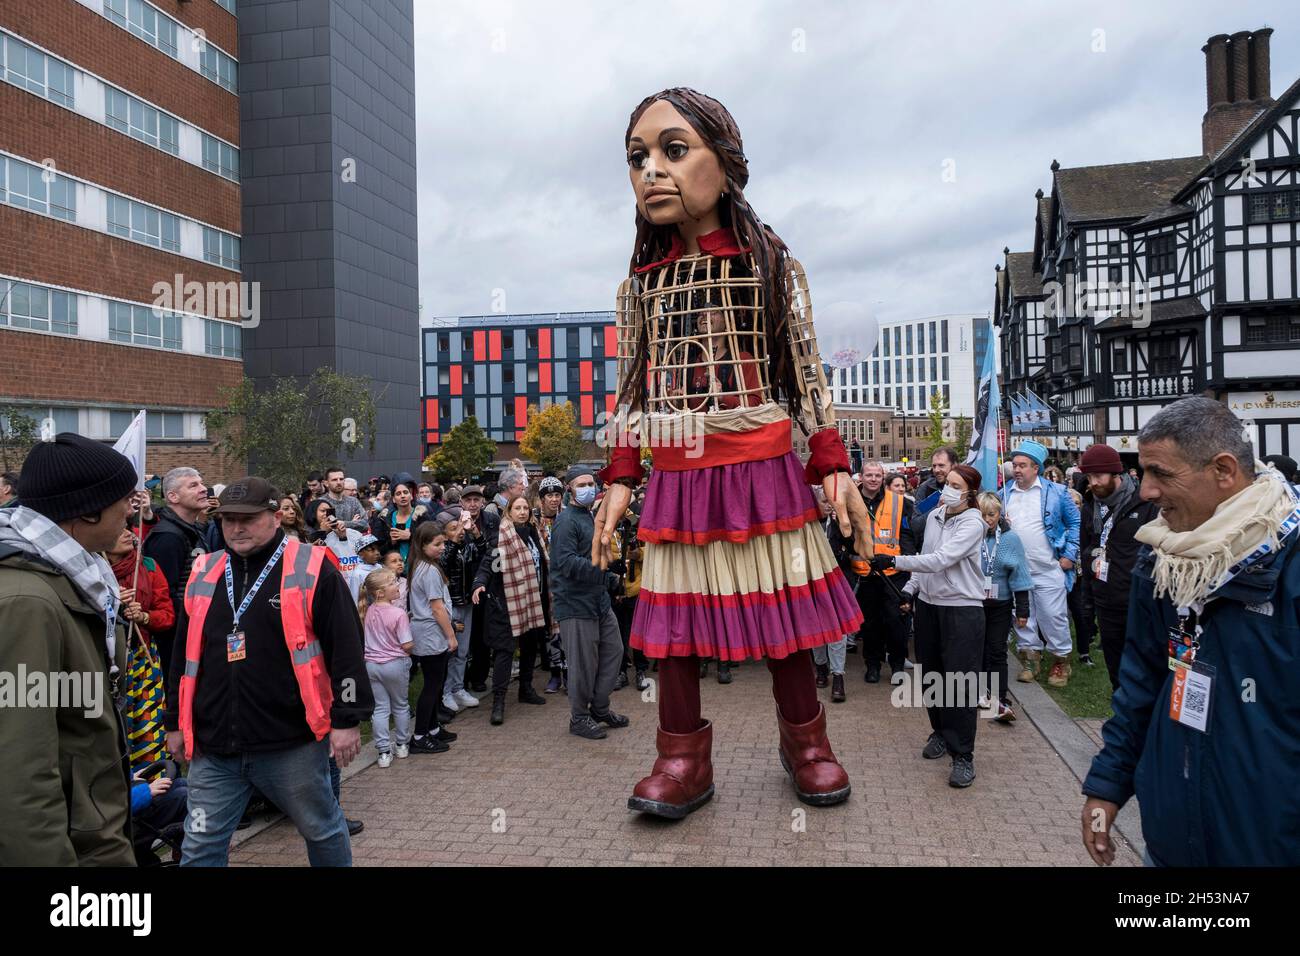 Little Amal delights crowds of onlookers as she walks through the city centre on 27th October 2020 in Coventry, United Kingdom. Little Amal is a 3.5 metre-tall puppet and living artwork of a young Syrian refugee child who has spent the last 3 months walking 8000 km from the boarder of Syria across Turkey, Greece, Italy, France, Switzerland, Germany, Belgium and the UK to focus attention on the urgent needs of young refugees. Coventry, which has the largest Syrian resettlement programme in the region, and also a large population of asylum seekers, is the current city of culture, with a long his Stock Photo